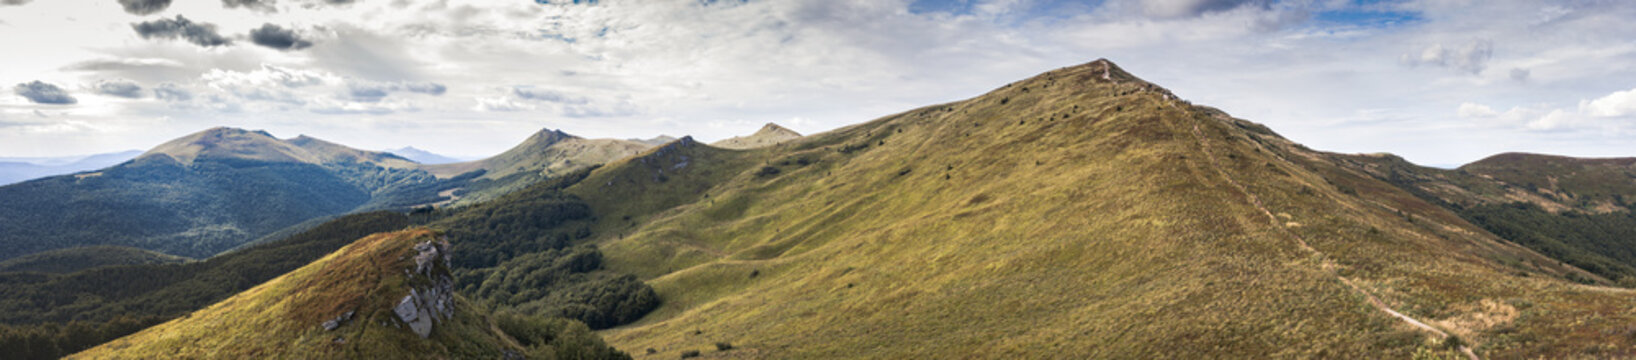 Large Panorama on Bieszczady mountains in Poland during late summer, early autumn